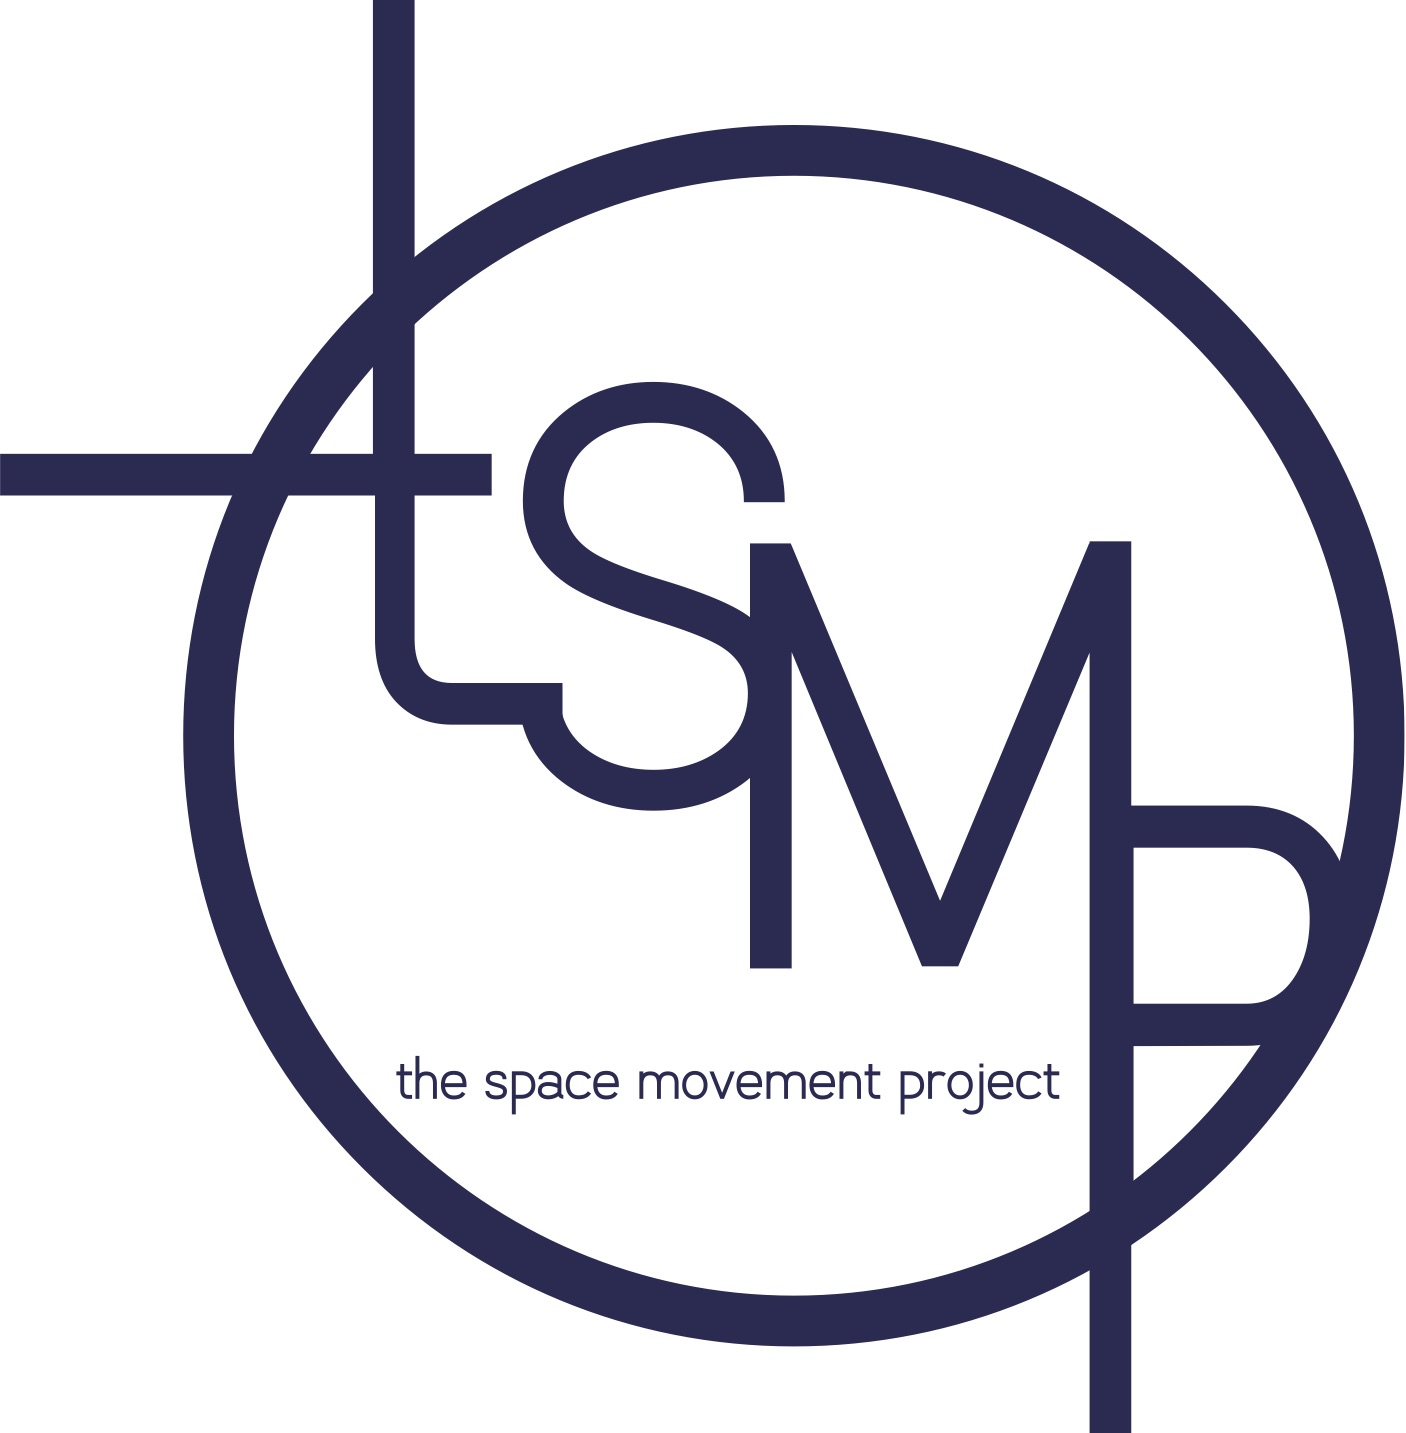 The Space Movement Project logo